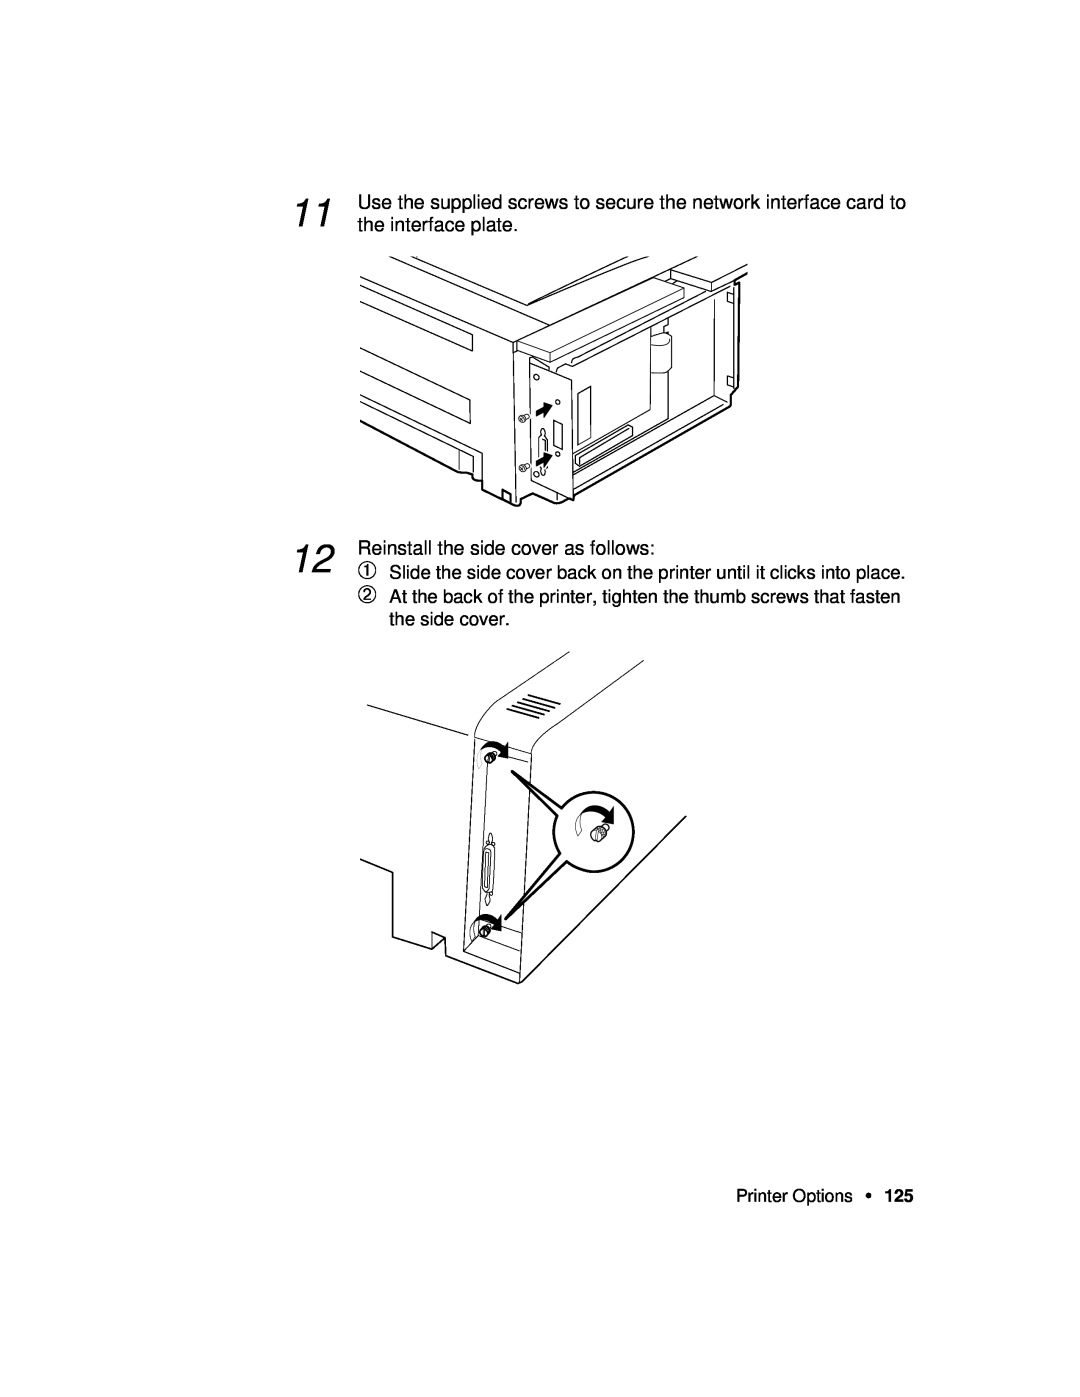 Xerox P12 manual Use the supplied screws to secure the network interface card to, the interface plate, the side cover 